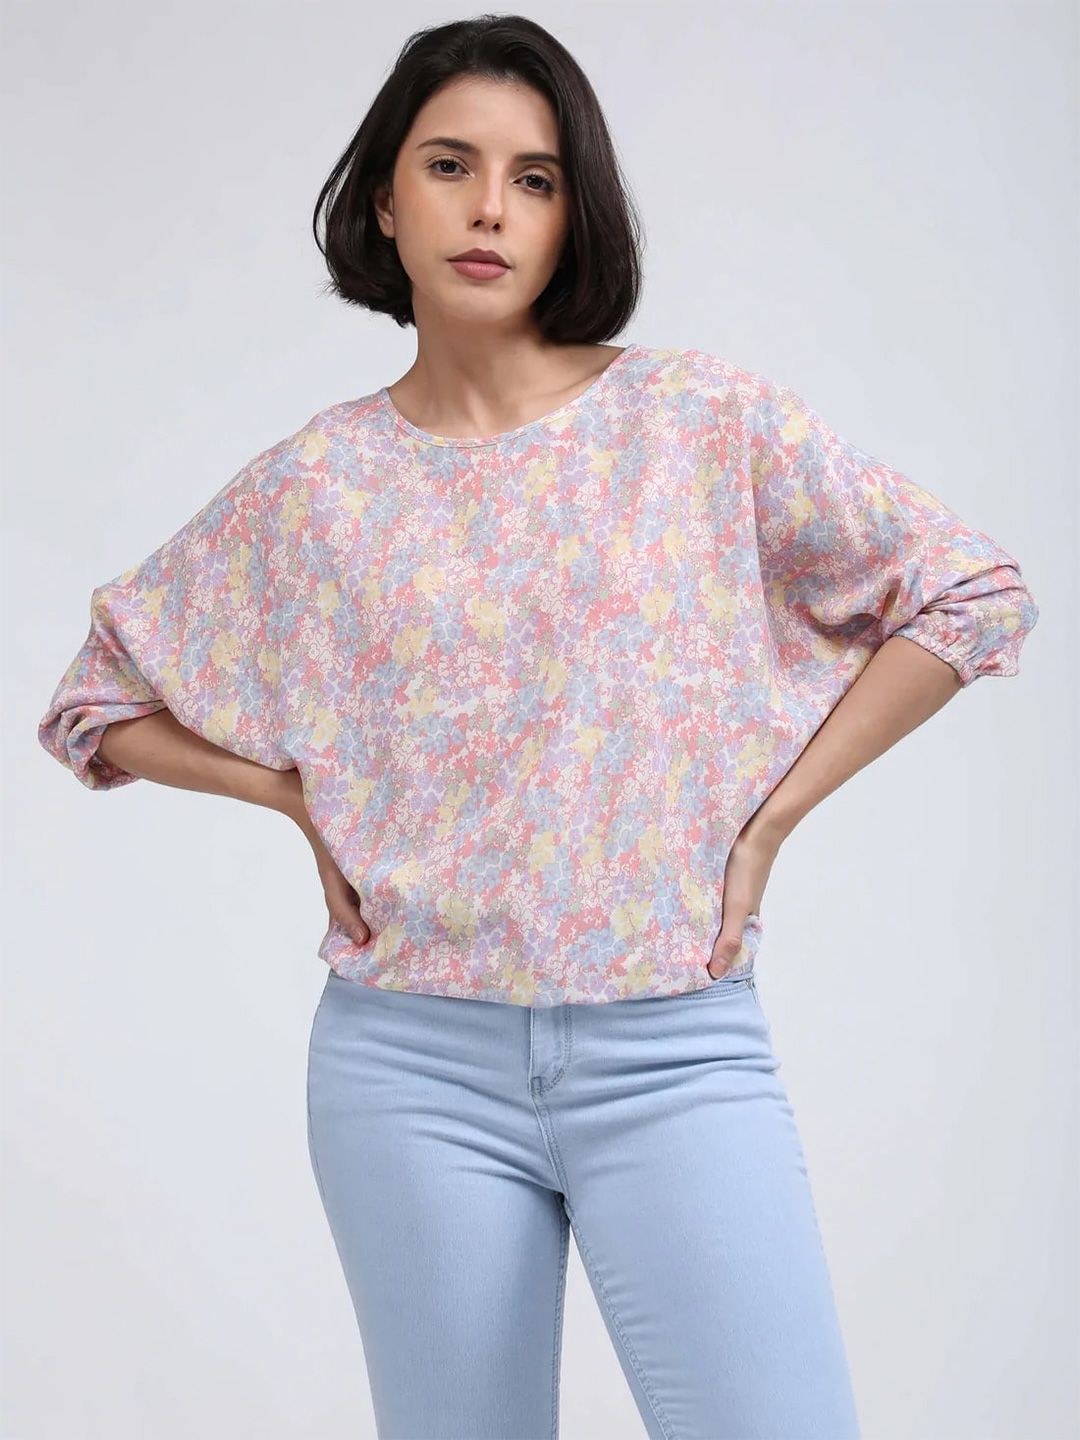 IDK Floral Printed Extended Sleeves Top Price in India